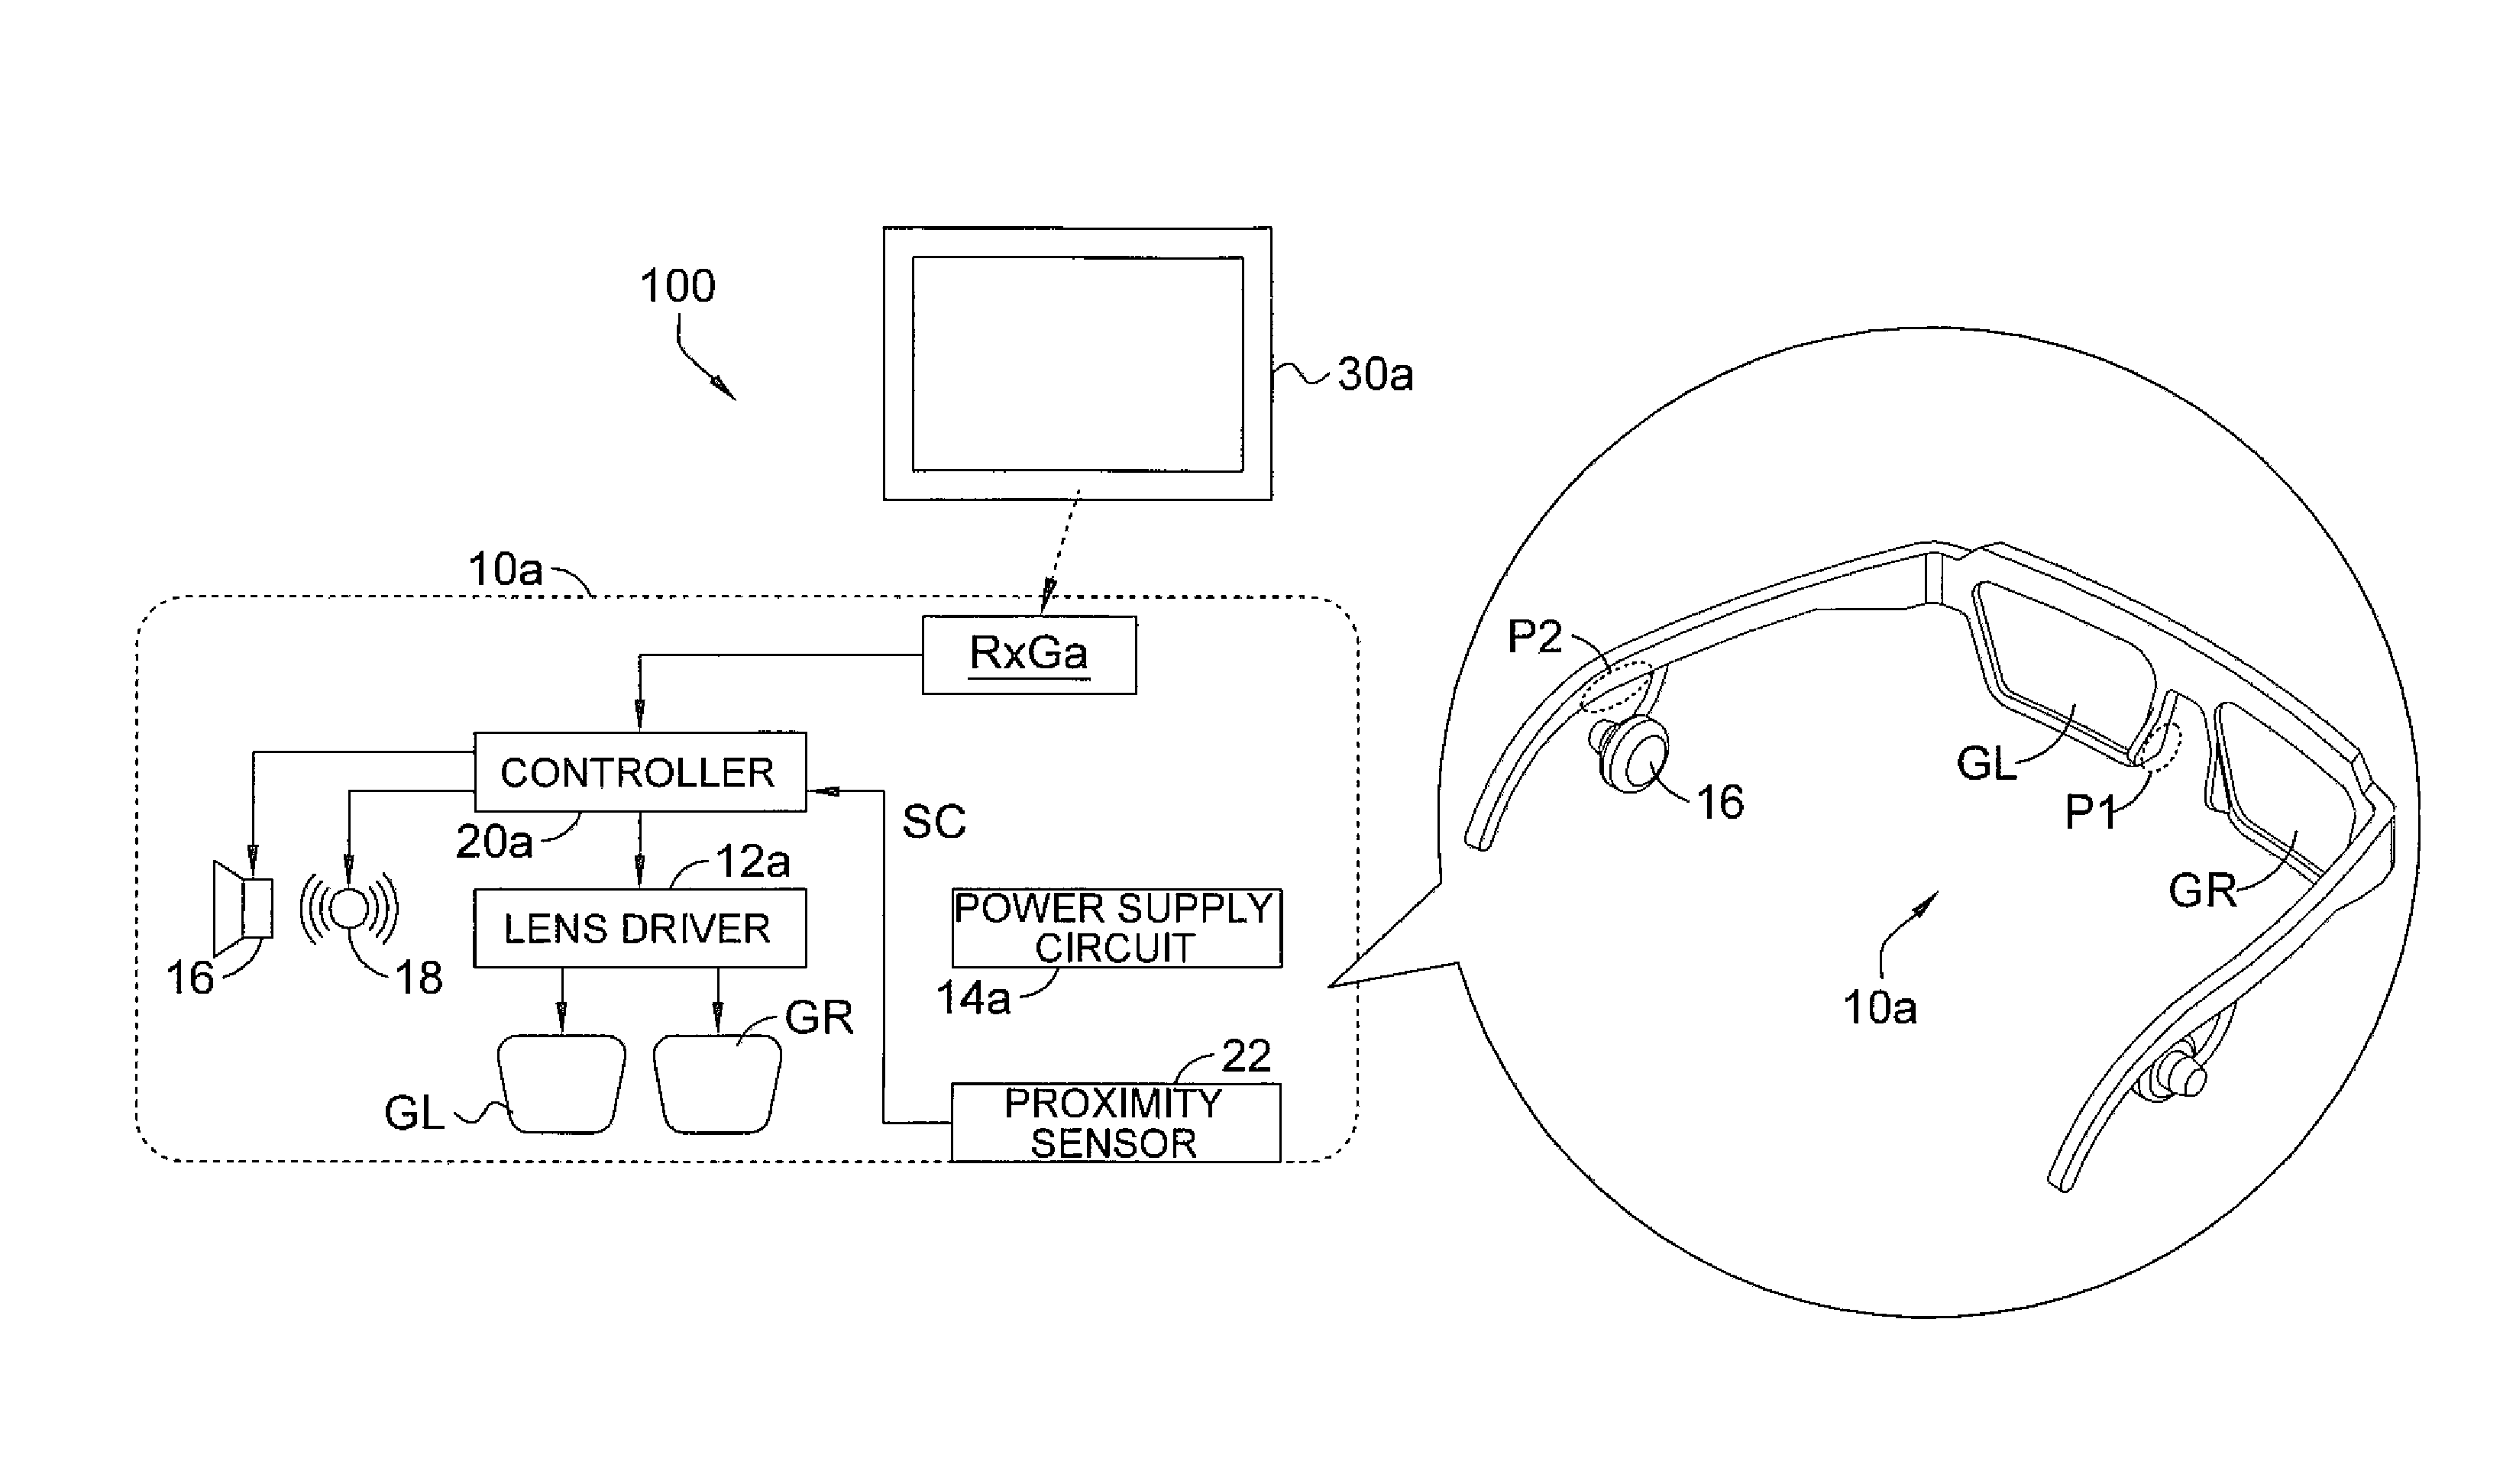 Display apparatus and associated glasses